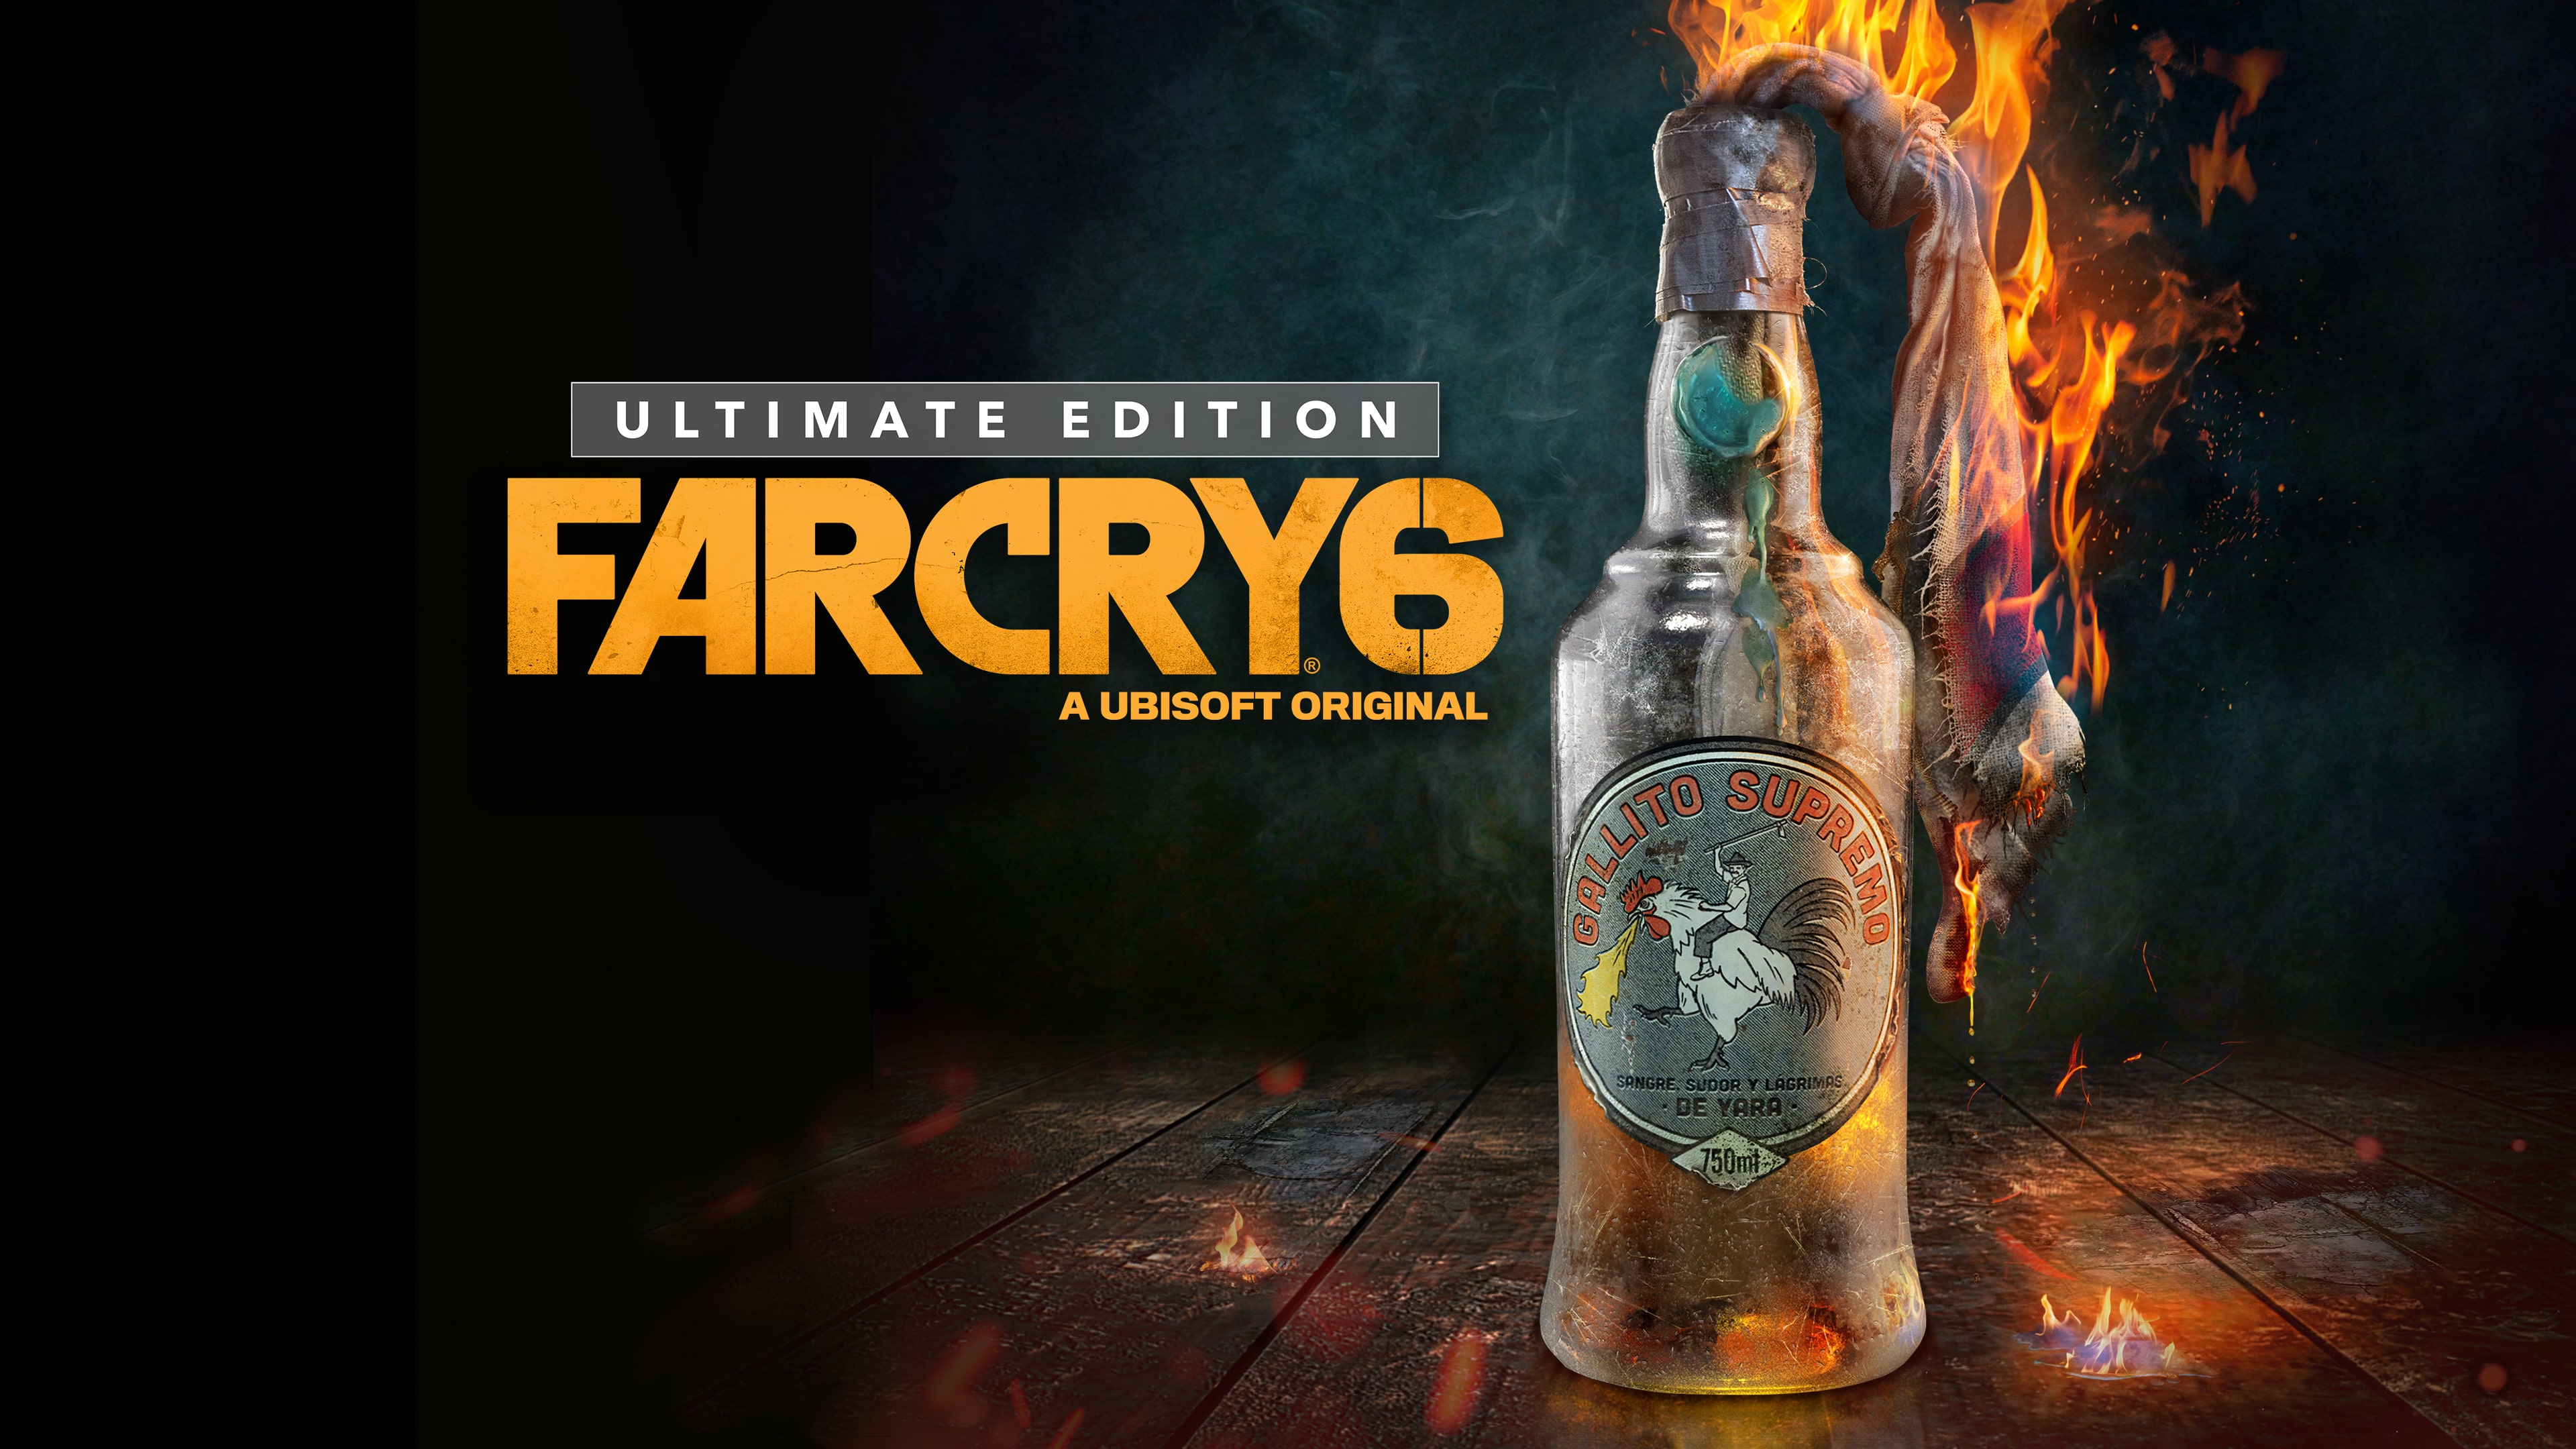 Far Cry 6 - Digital Ultimate Edition PS4 & PS5 (Simplified Chinese, English, Korean, Thai, Japanese, Traditional Chinese)